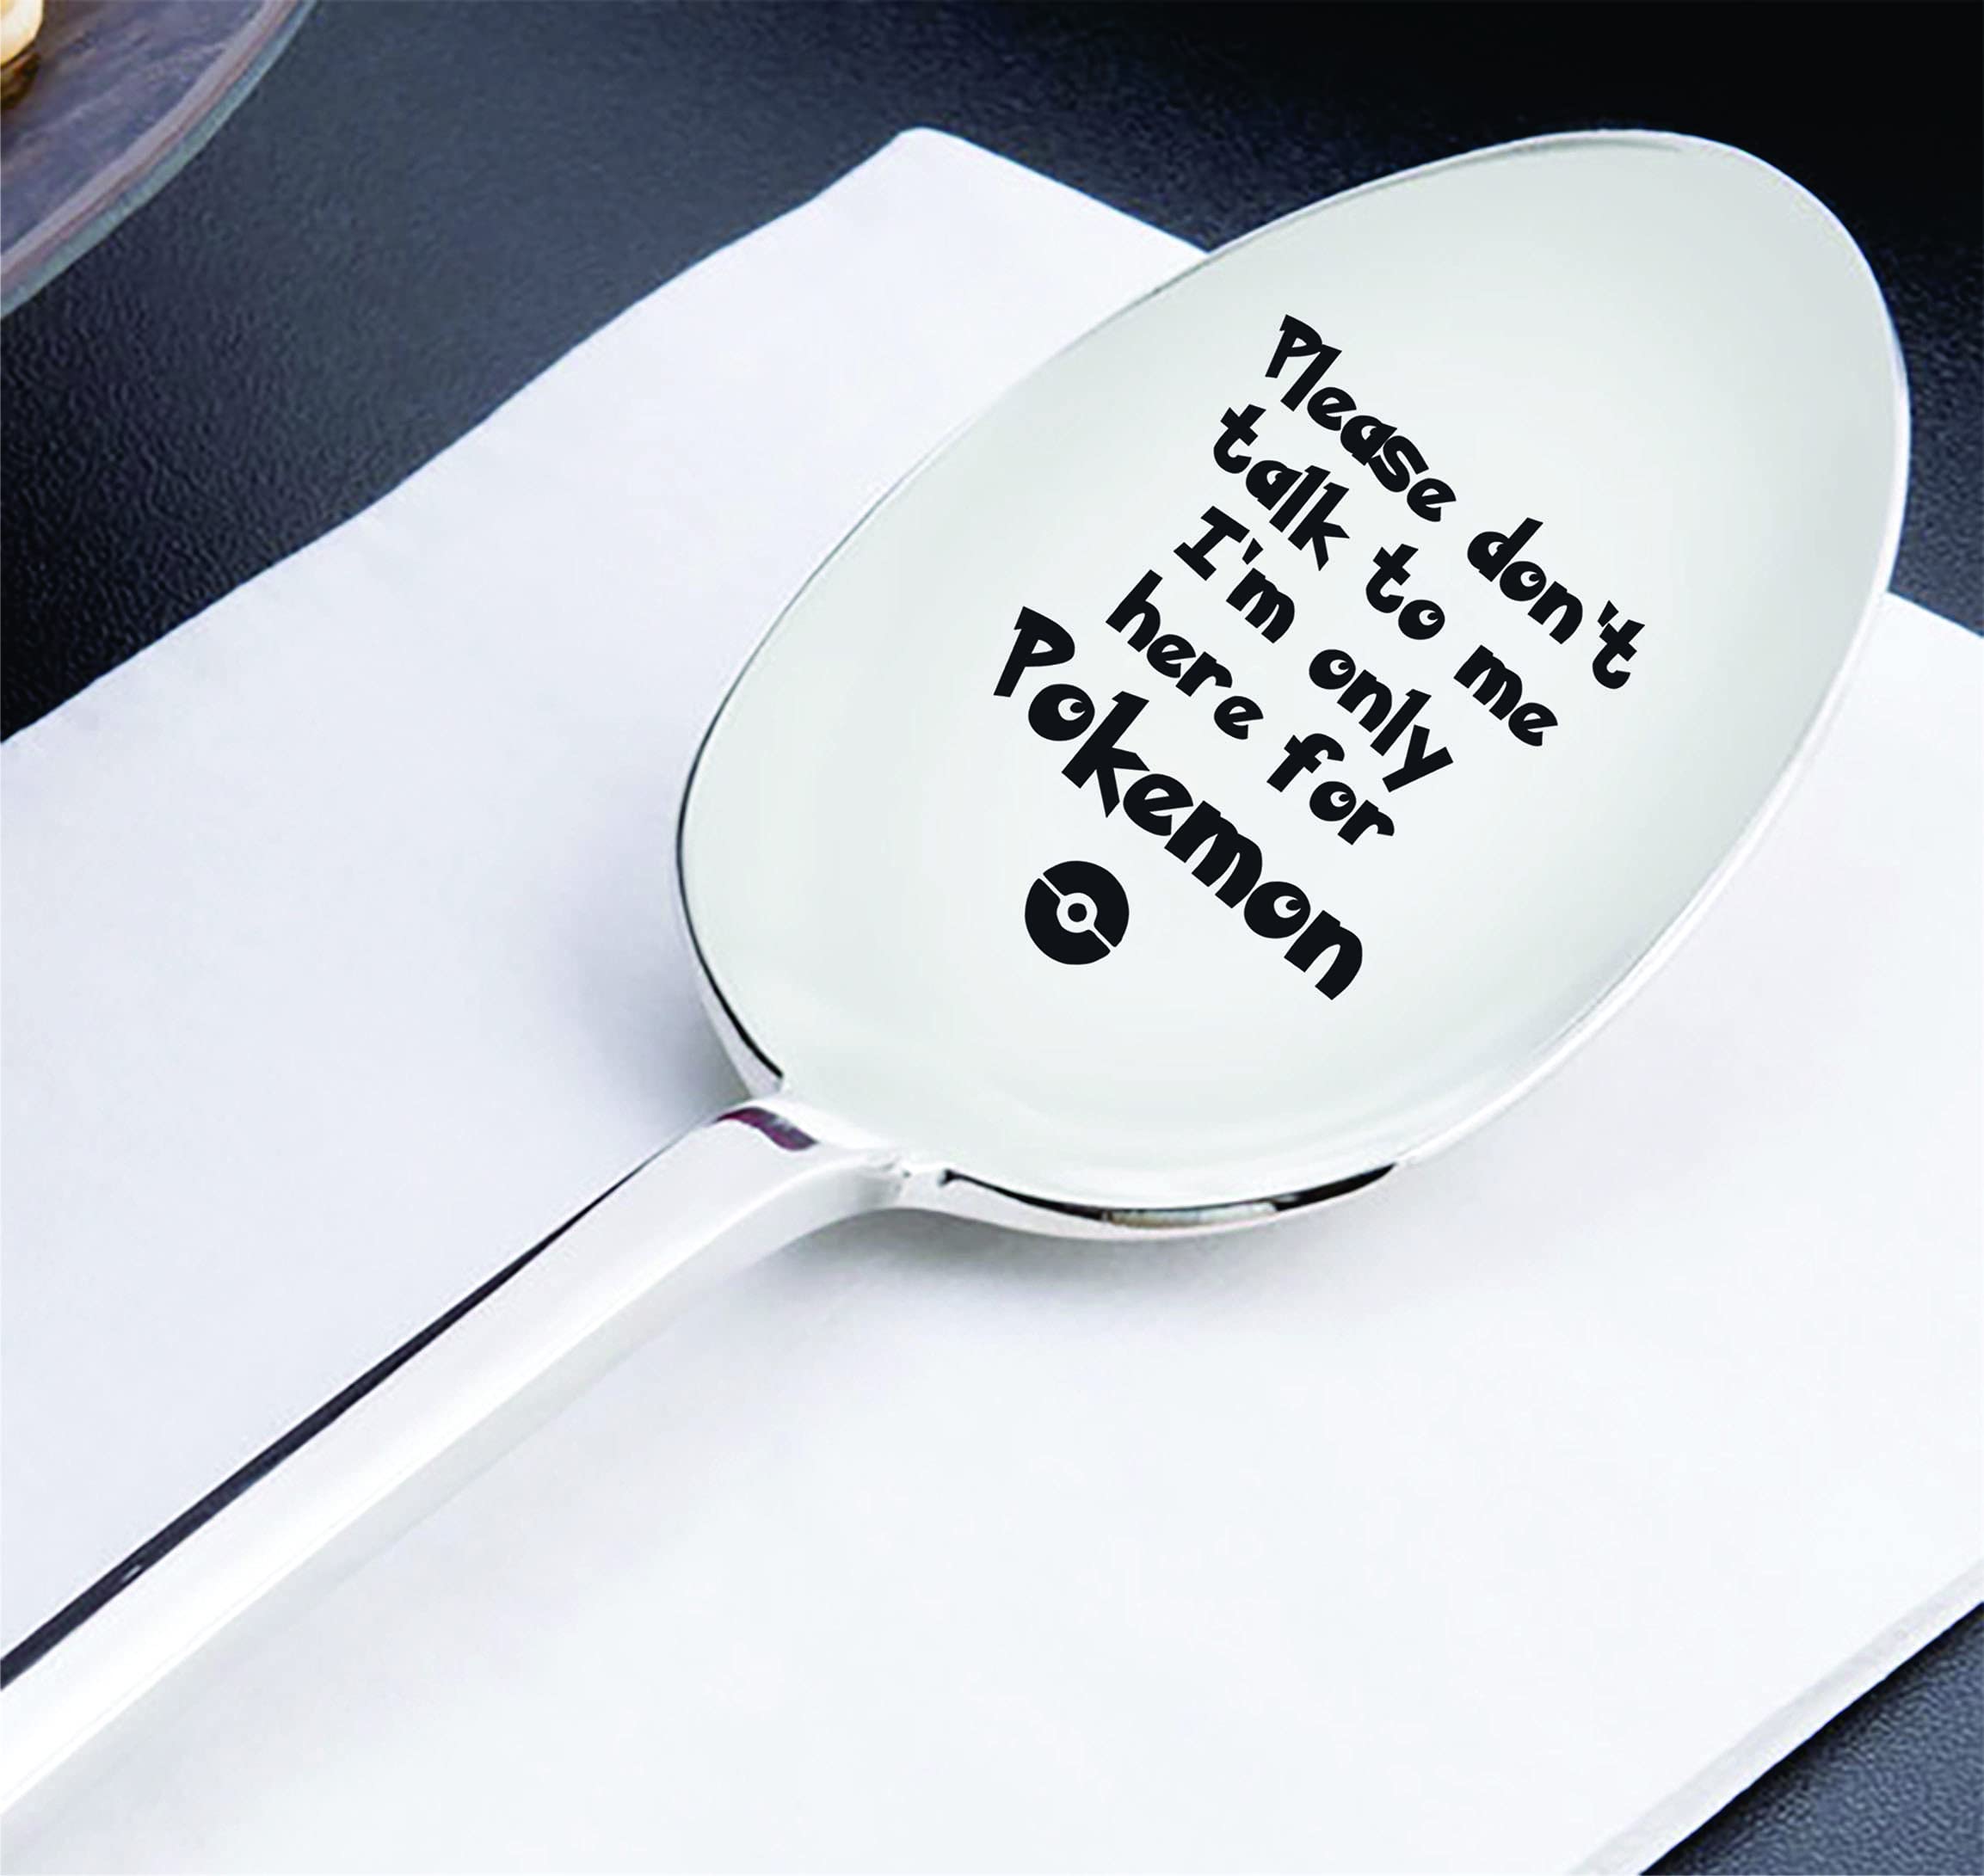 I'm Only Here For Pokemon- unique gift Idea-Engraved Spoon-boyfriend gift- gift for him birthday-Game Adventure